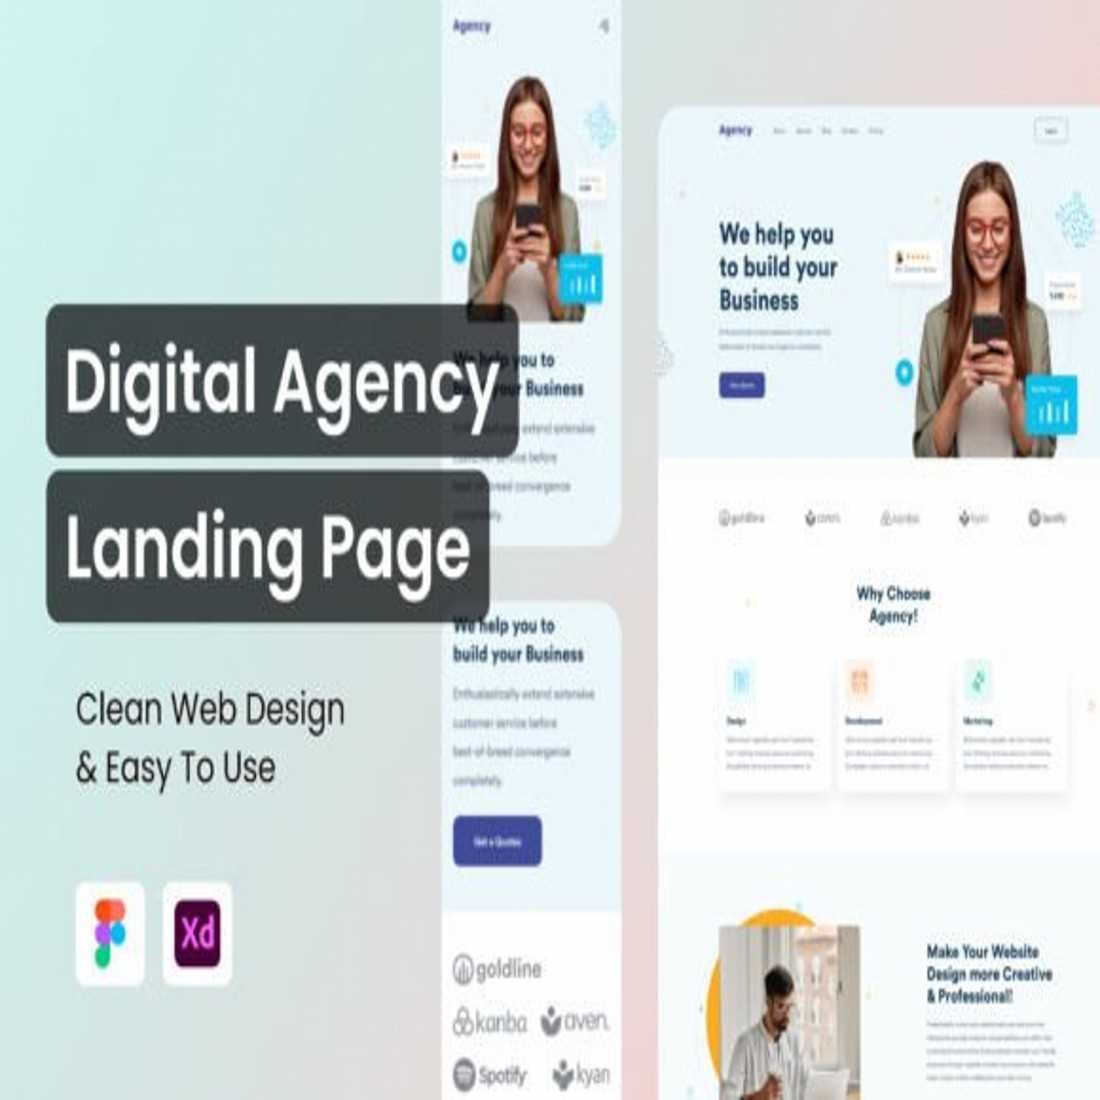 Digital Agency Web Landing Page preview image.